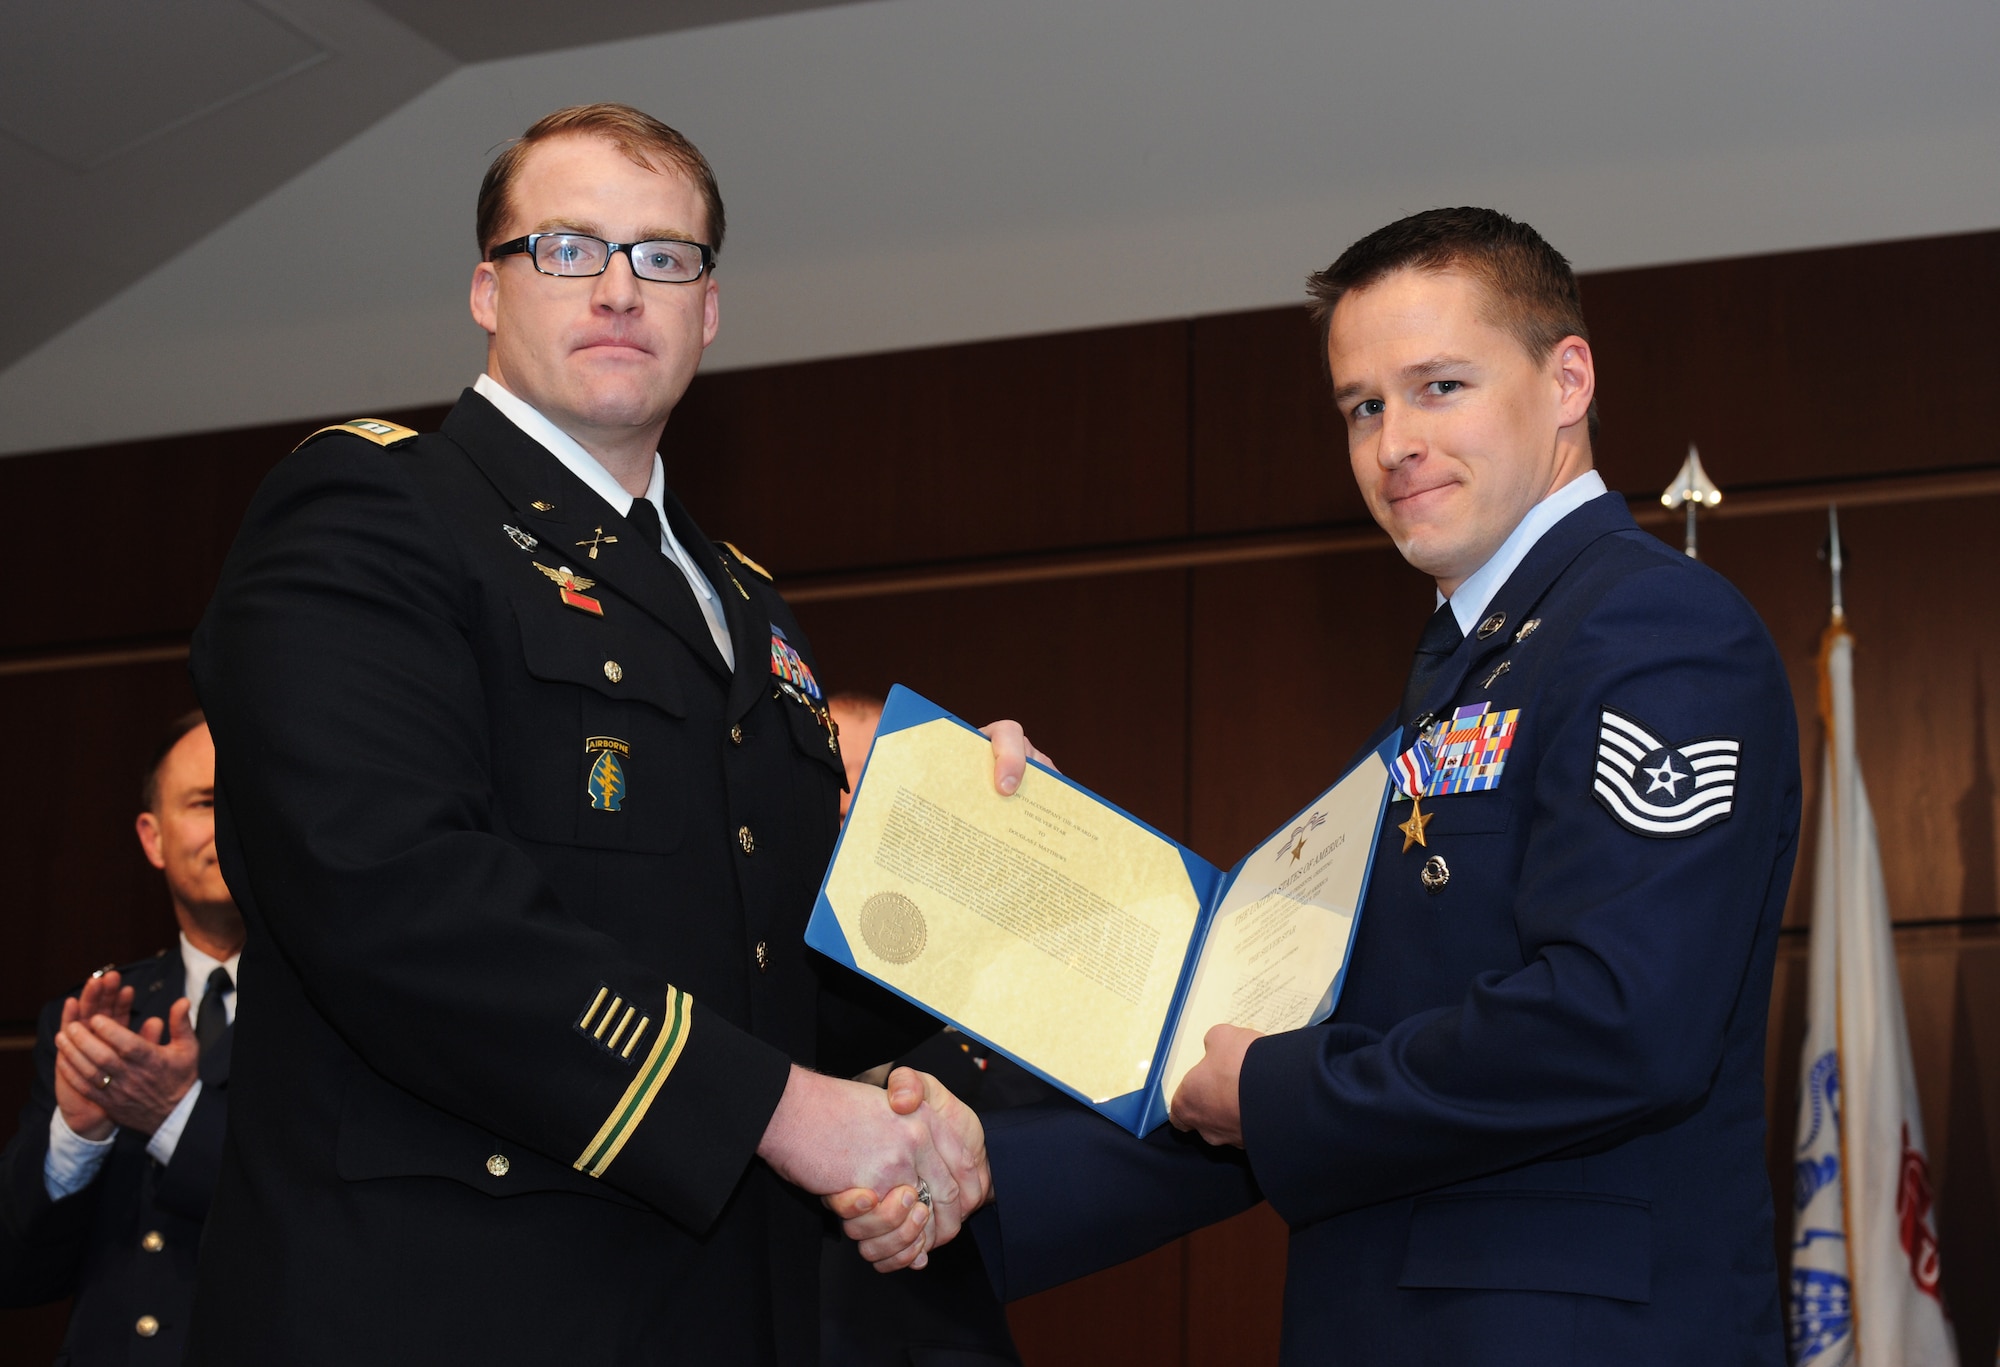 U.S. Army Capt. Seth Nieman (left) presents Tech. Sgt. Doug Matthews (right), a combat controller with the Oregon Air National Guard's 125th Special Tactics Squadron, with the rarely awarded Silver Star, March 24, during a ceremony at the 41st Infantry Division Armed Forces Reserve Center at Camp Withycombe, in Clackamas, Ore. Matthews' actions saved Nieman's life, along with other Special Forces teammates, during an ambush near Jalrez, Wardak Province in Afghanistan on Nov. 27, 2012. (U.S. Air National Guard photo by Tech. Sgt. John Hughel, 142nd Fighter Wing Public Affairs/Released) 